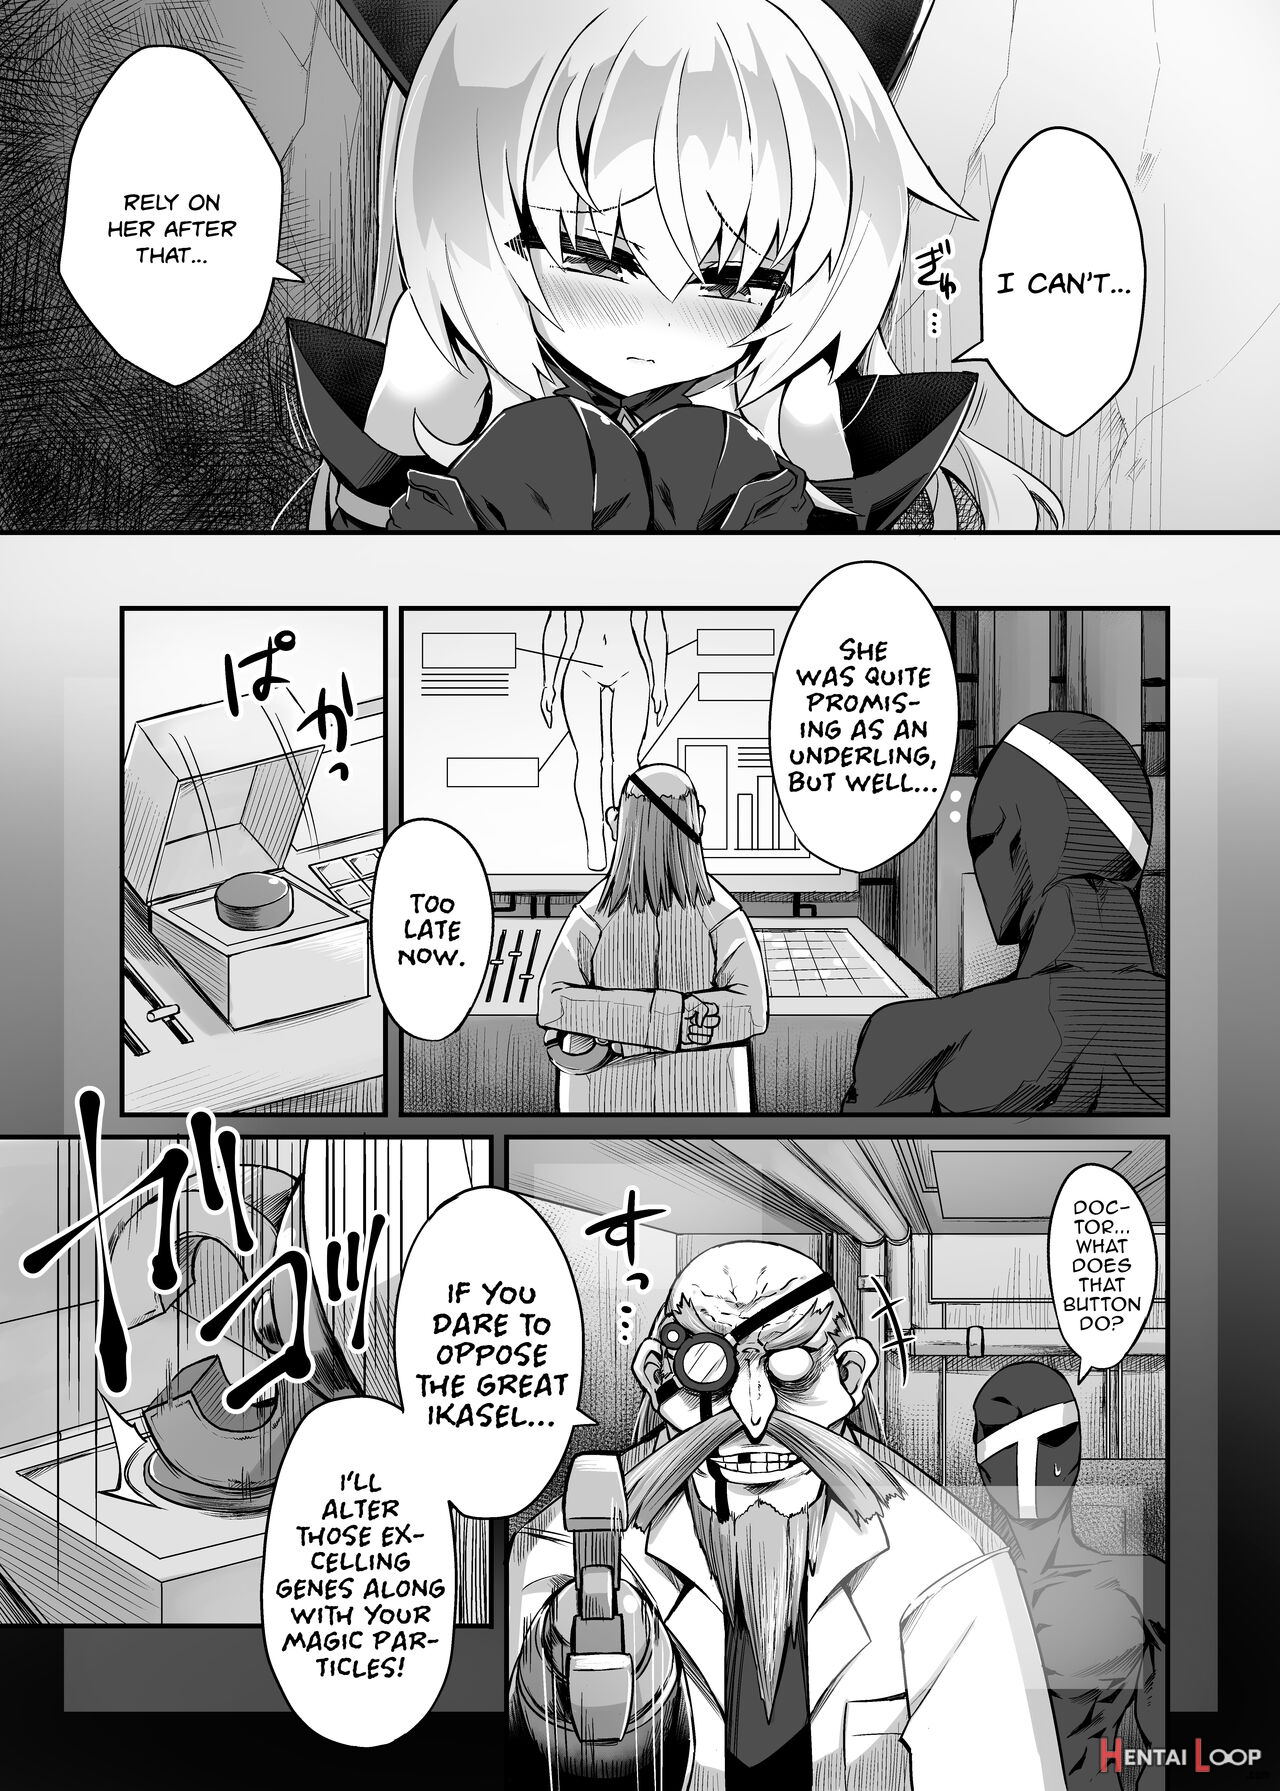 Masochist Cat X Magic Girl ~a Manga In Which The Evil Magical Girl Is Put On A Leash And Domesticated By The Good Magical Girl~ page 4